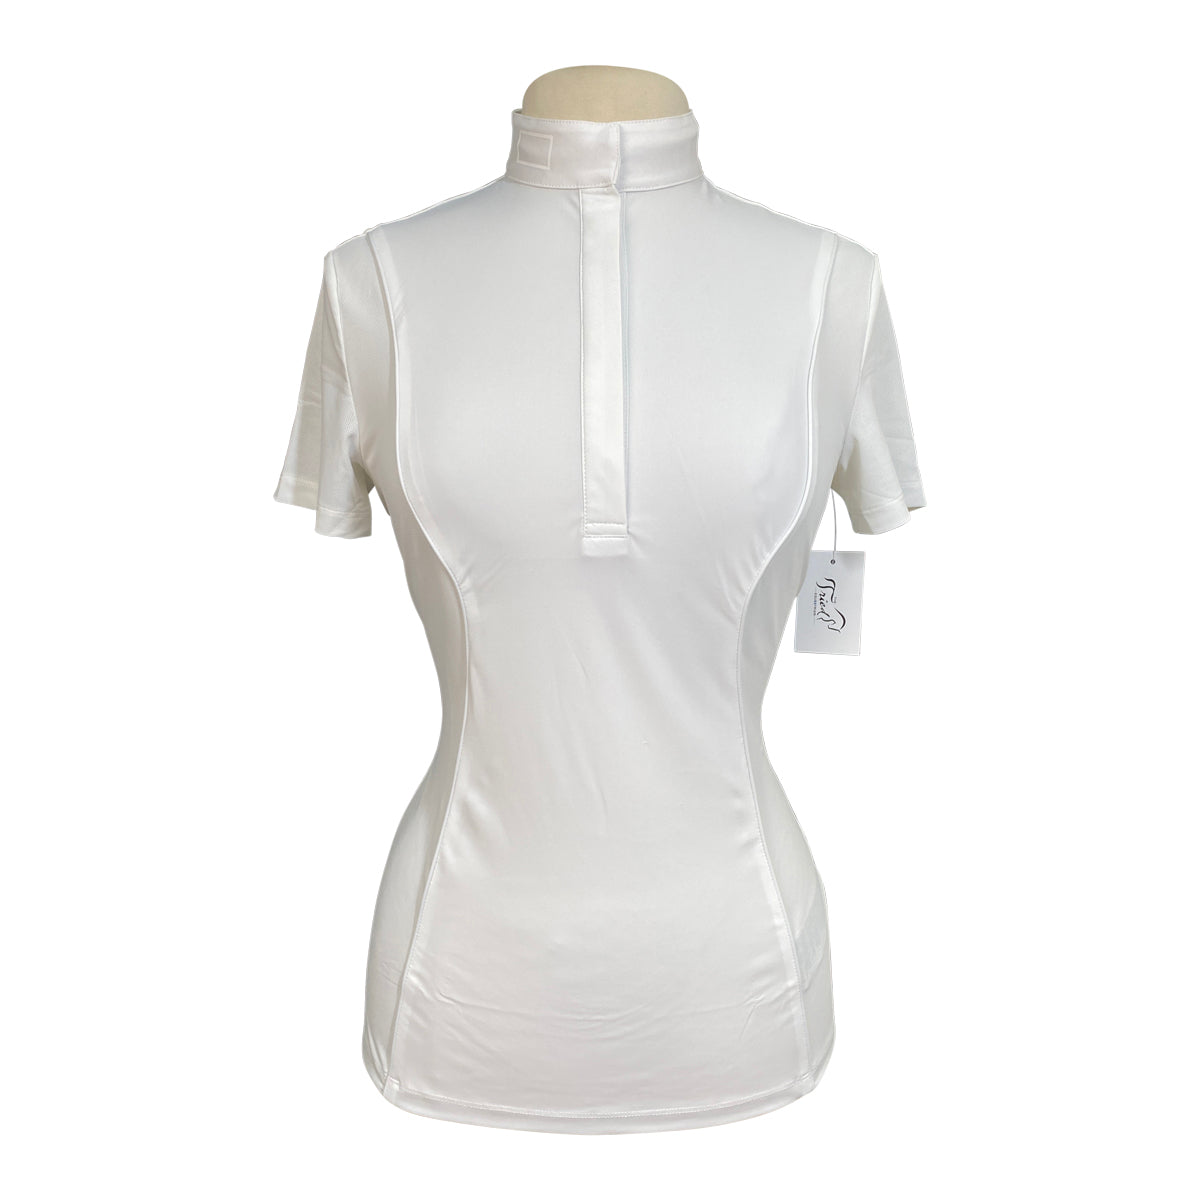 Rider's Gene Jersey & Mesh Short Sleeve Competition Polo in White